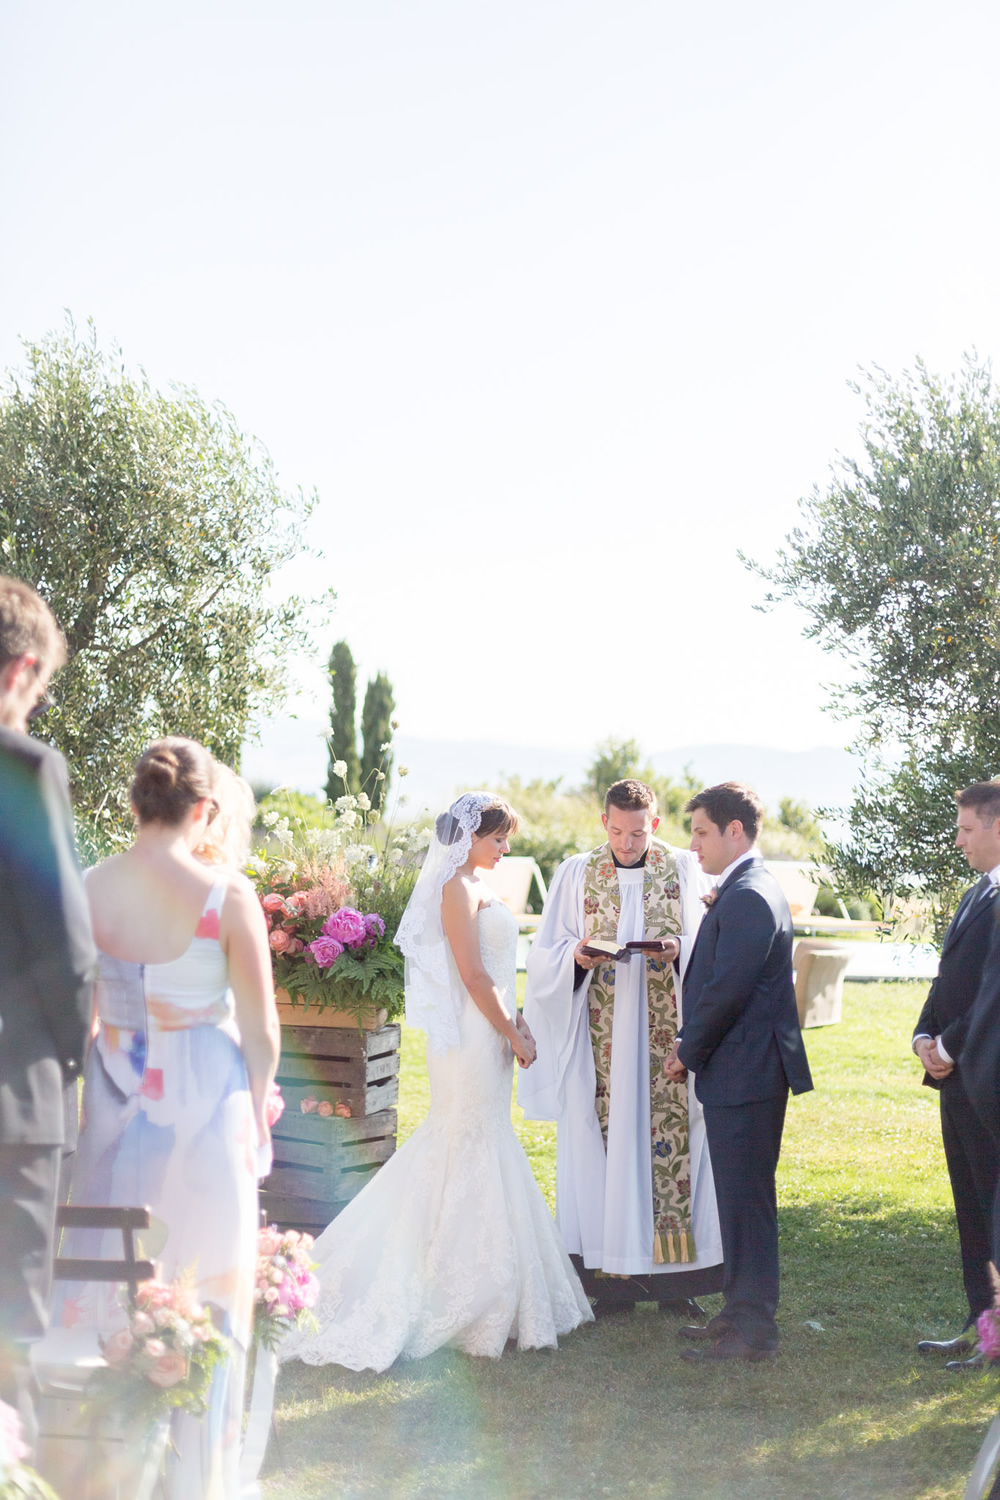 Getting married in Val d'Orcia